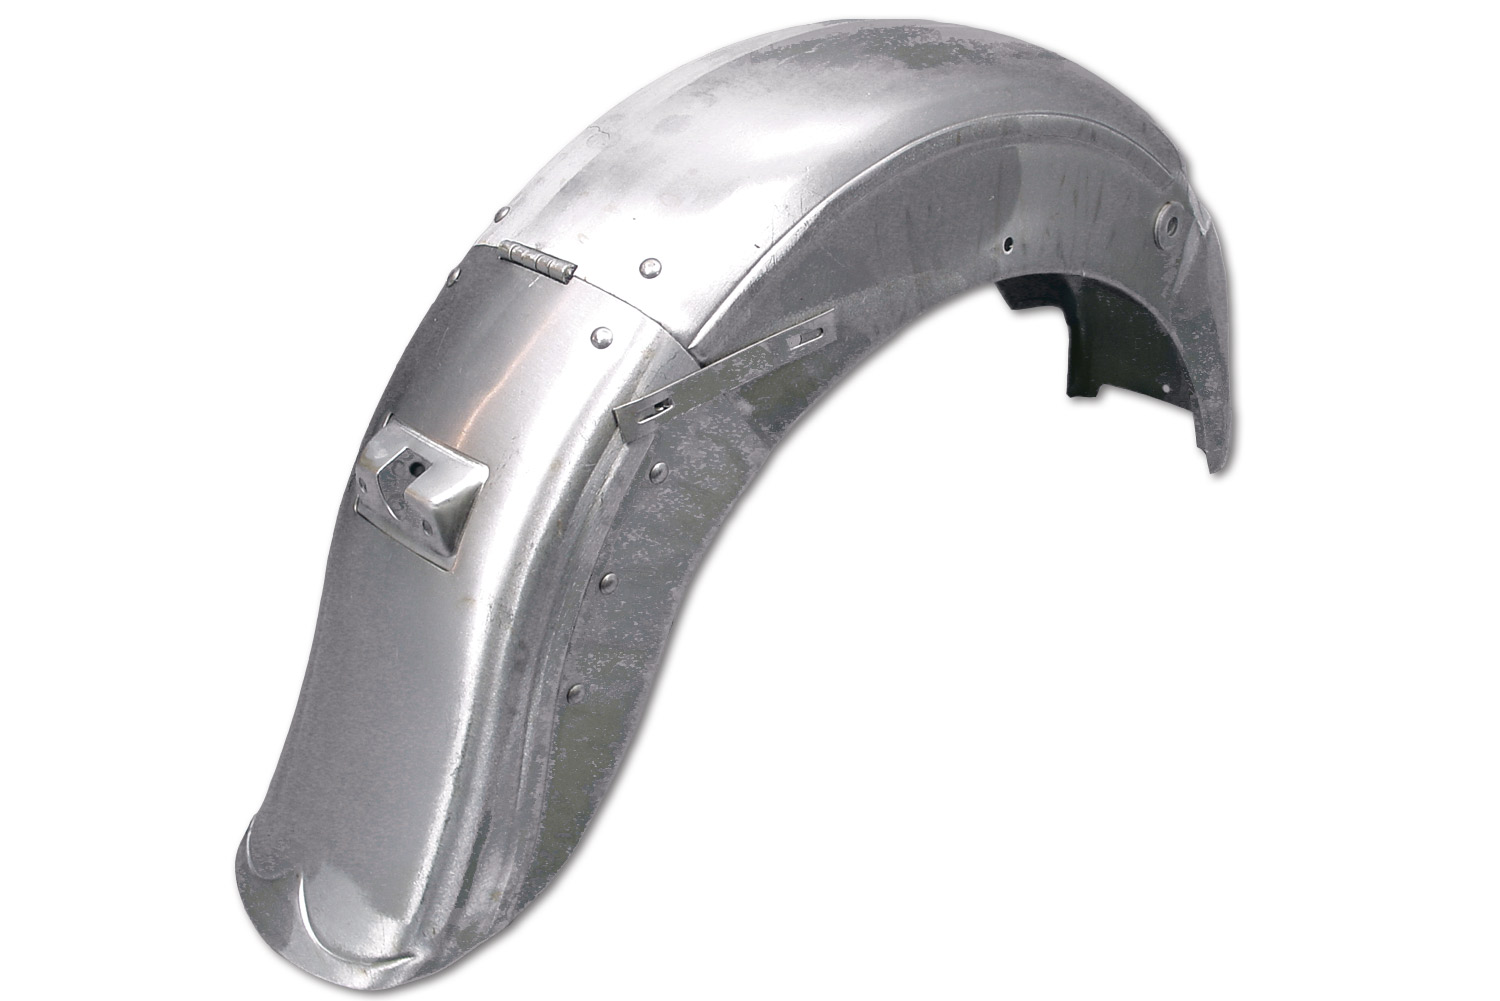 Replica Rear Fender with Hinged Tail